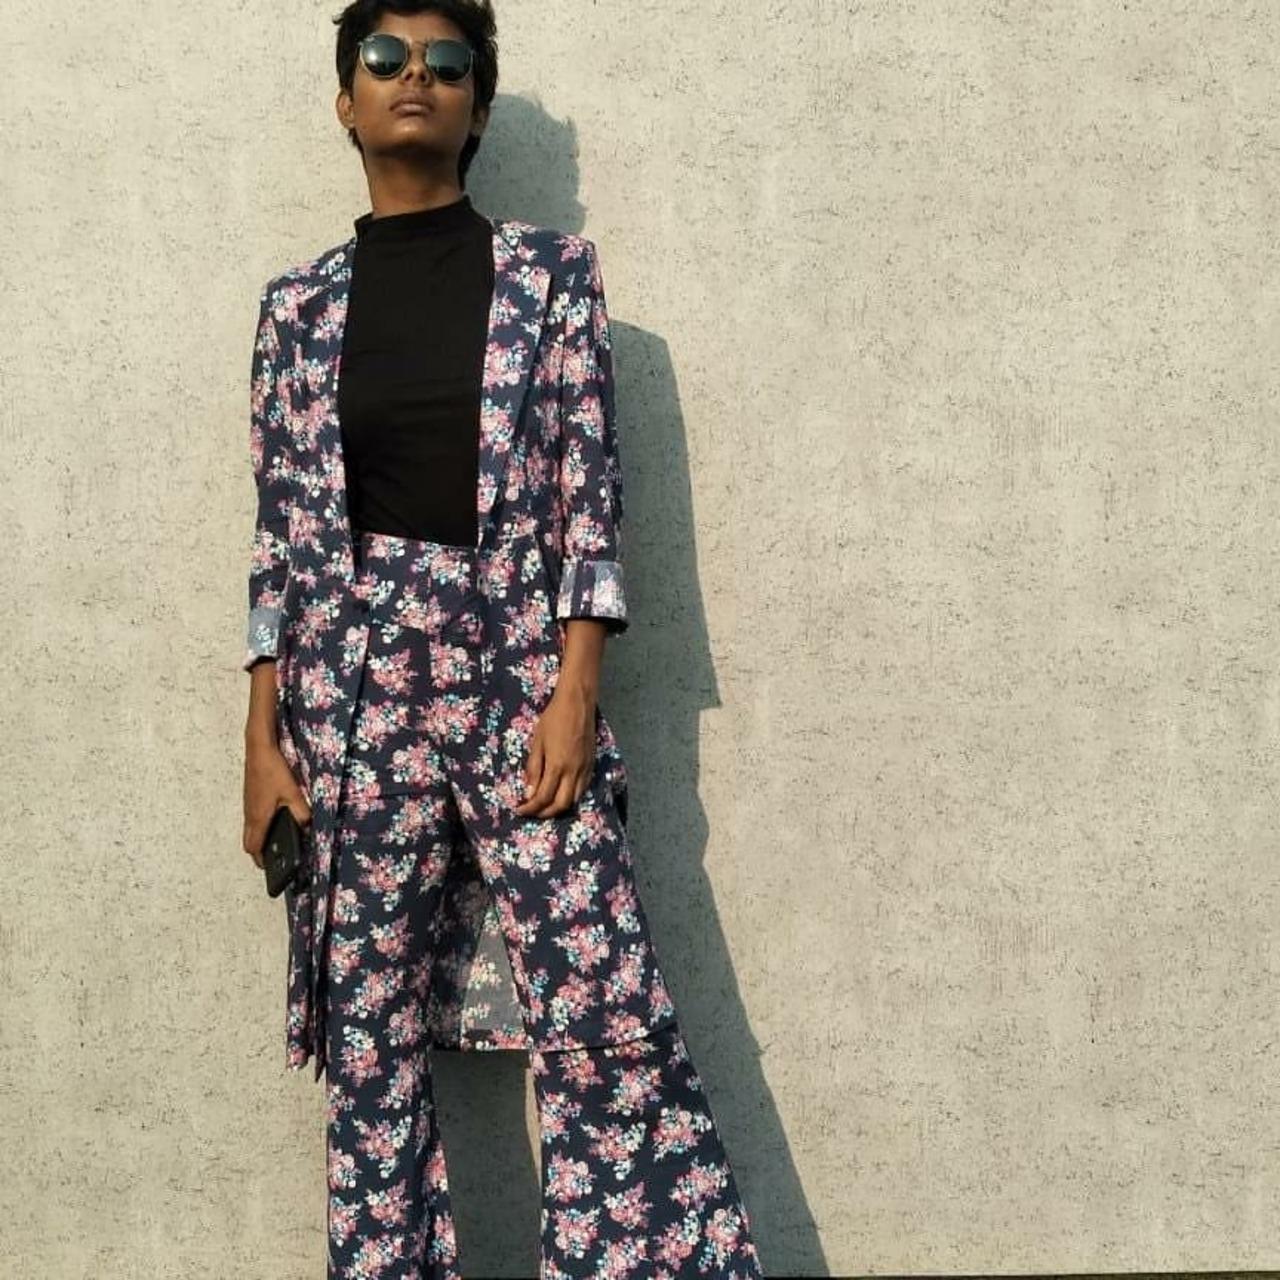 This floral-print suit is embodying gender fluidity at its best!